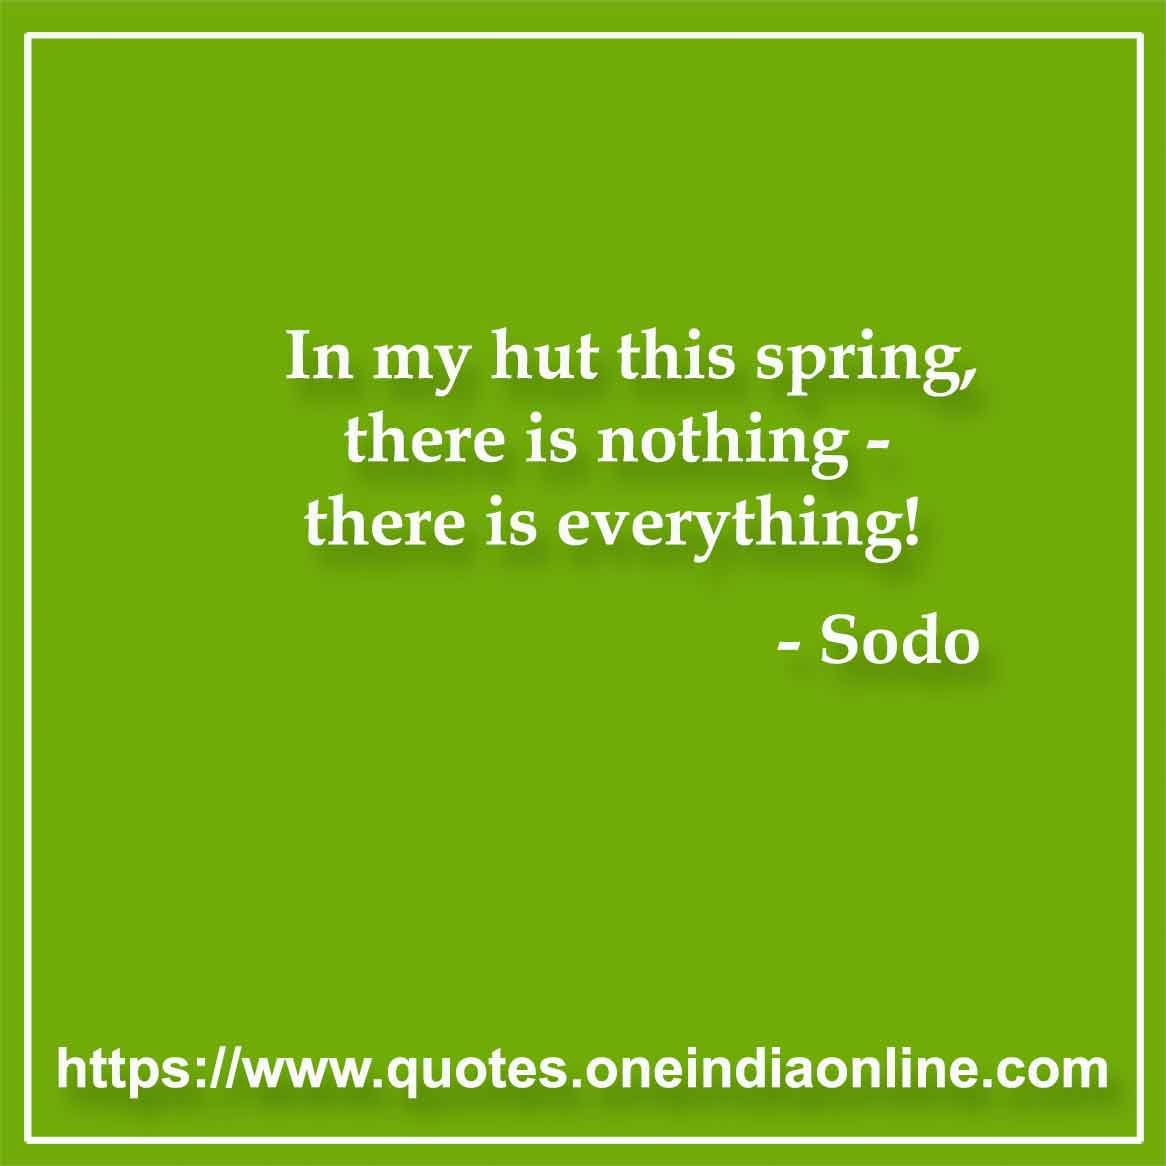 In my hut this spring, there is nothing - there is everything!

- Sodo Quotes 